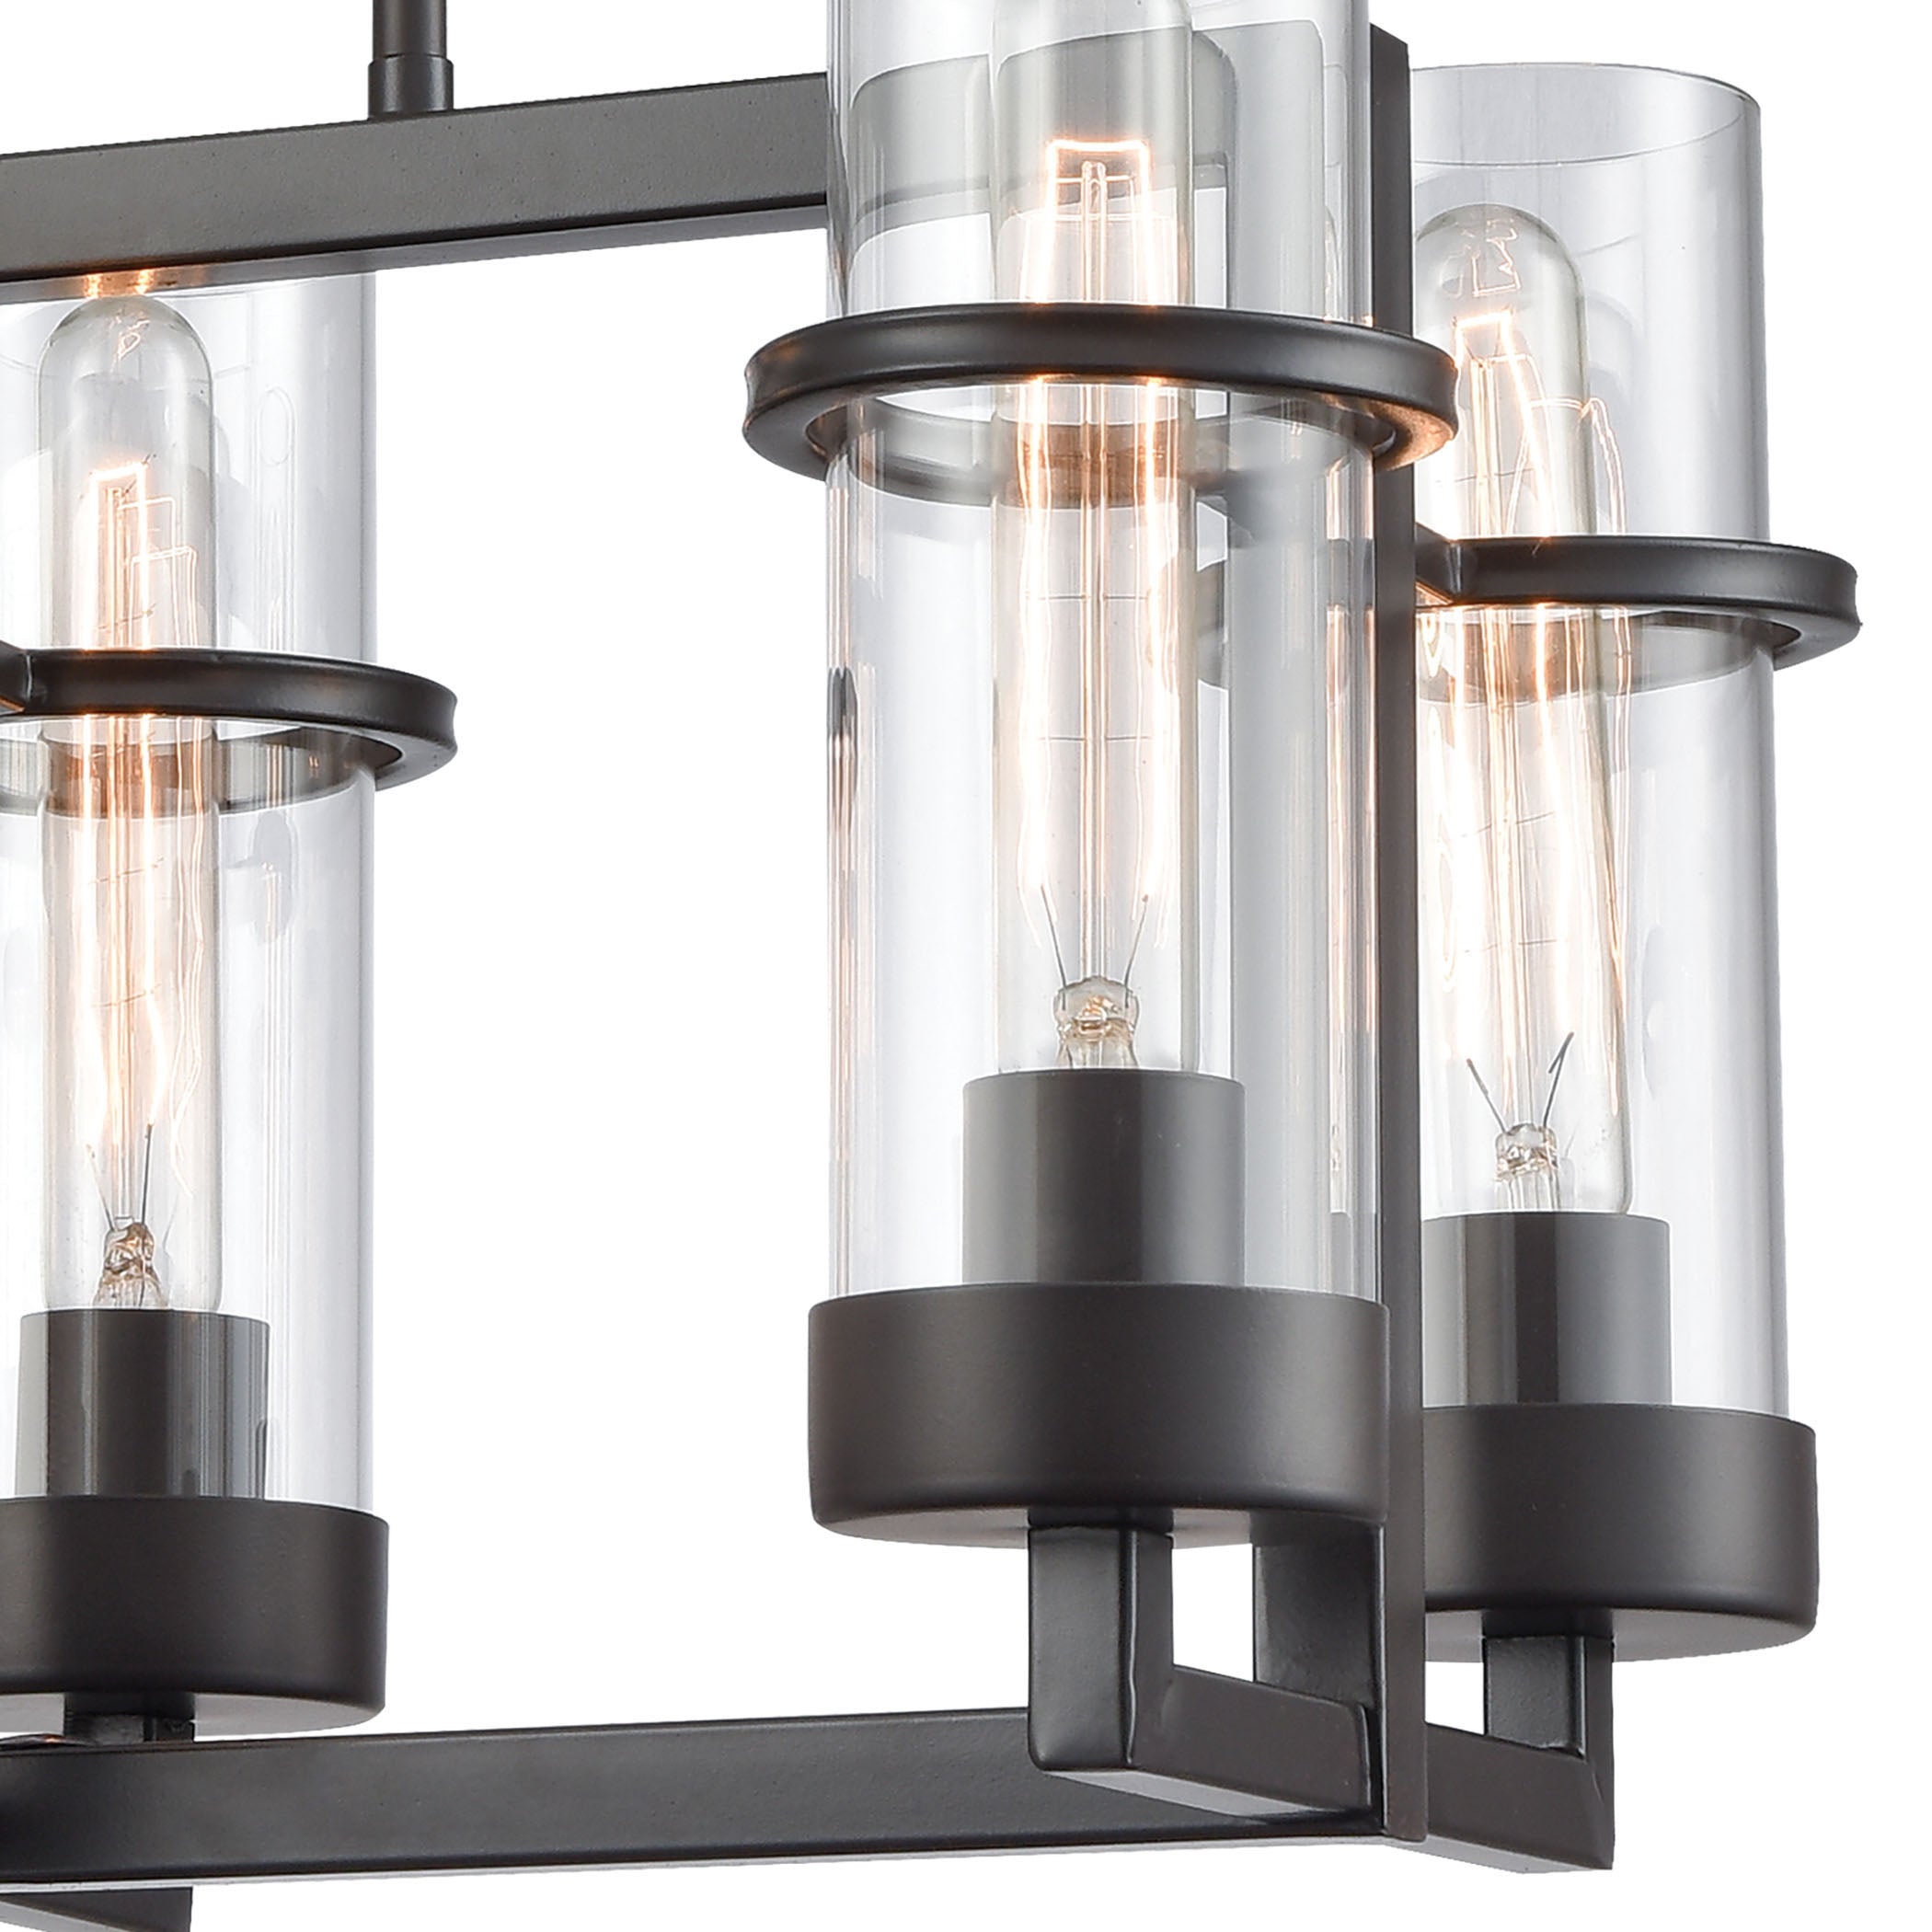 ELK Lighting 21145/6 Holbrook 6-Light Linear Chandelier in Oil Rubbed Bronze with Clear Blown Glass